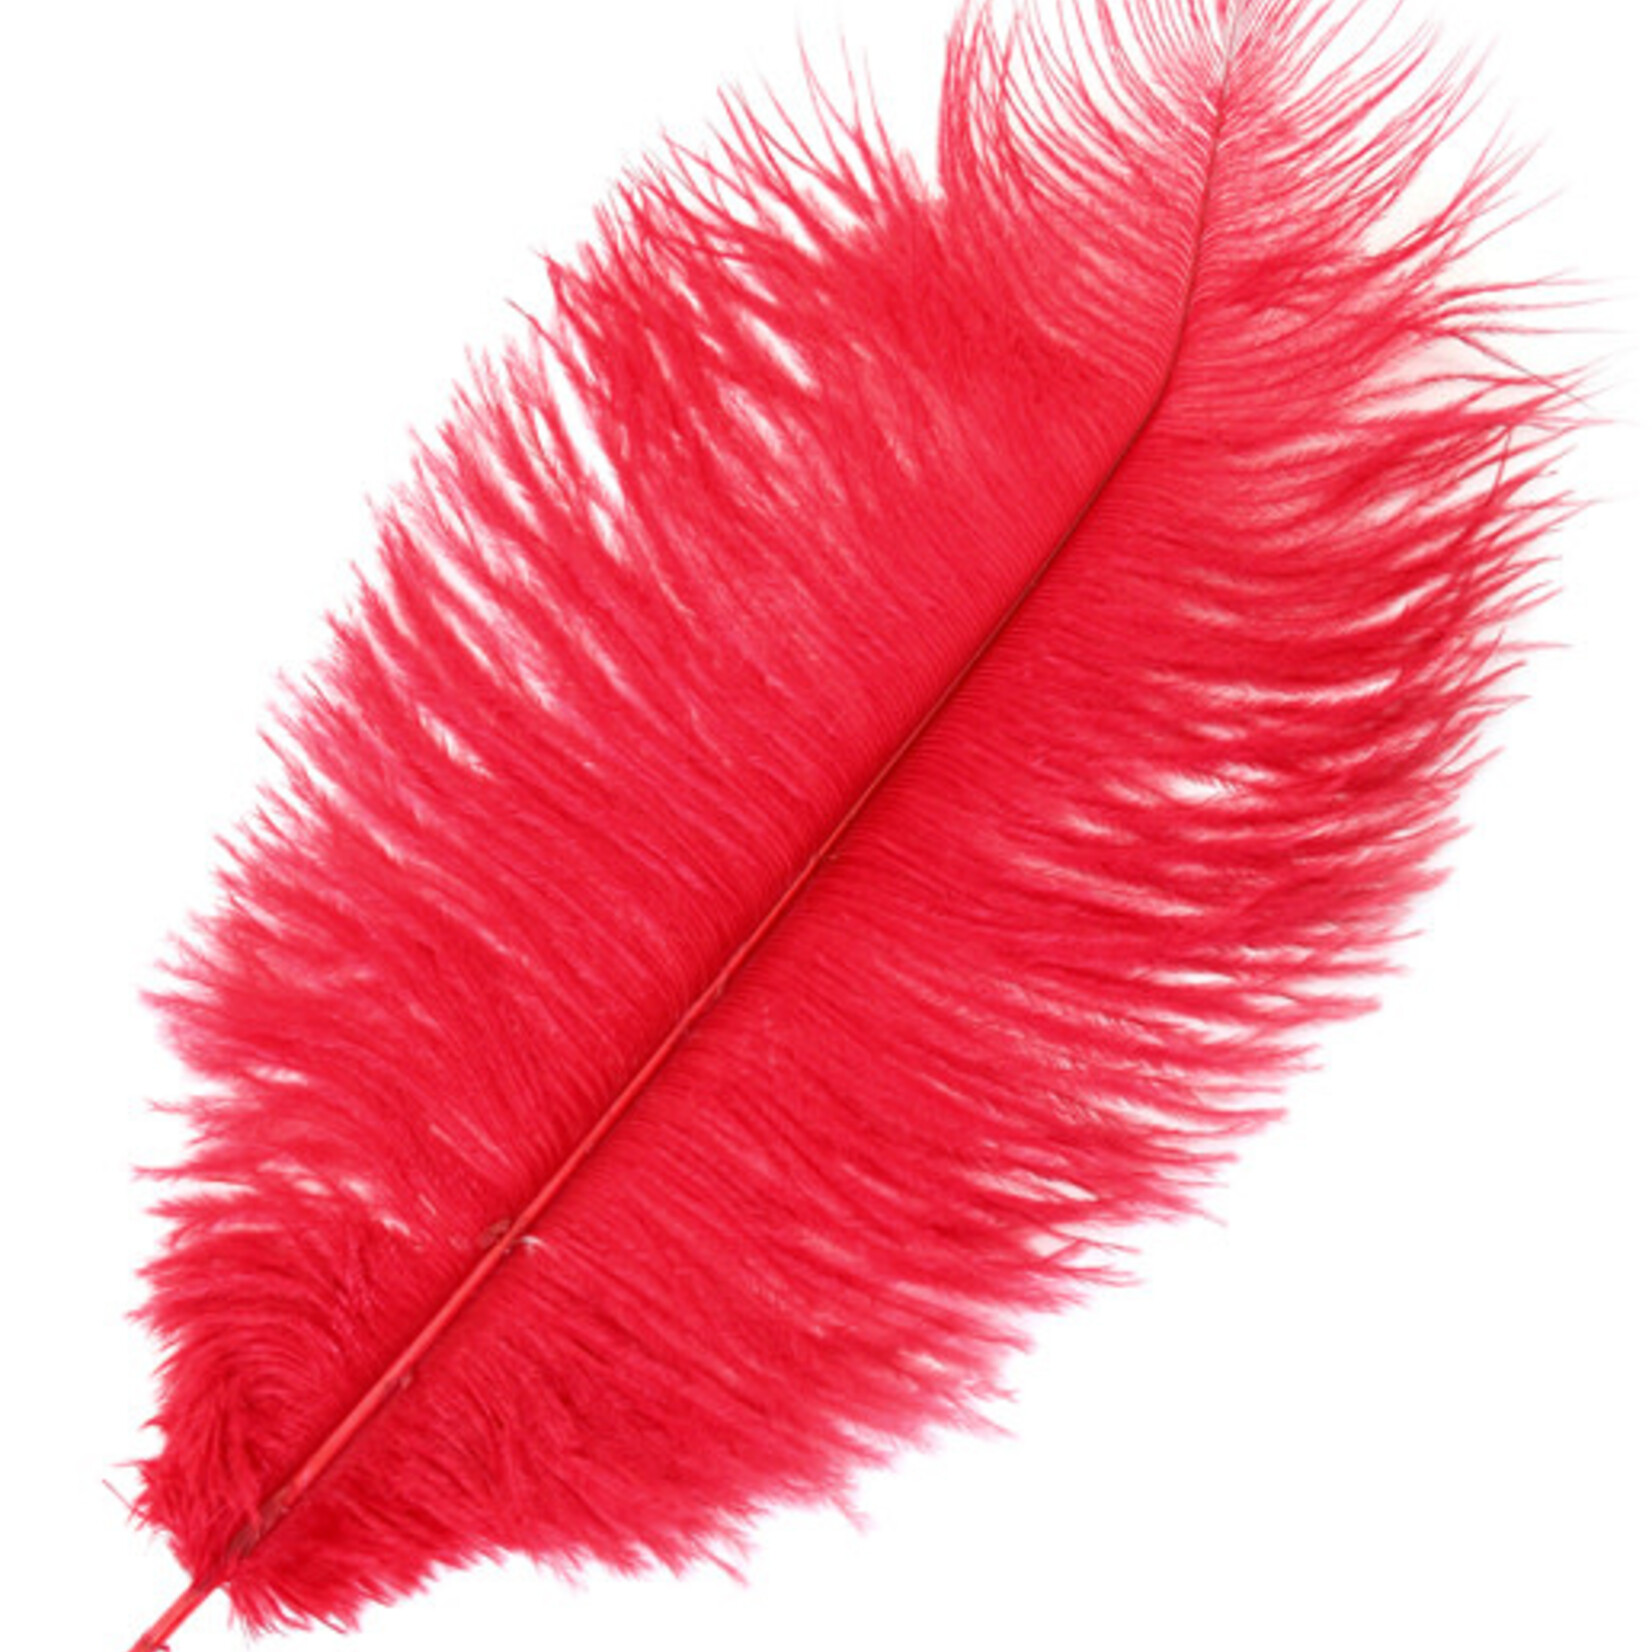 Ostrich Drab Plumes 6-8 Inch (12 pieces) Red/White/Black